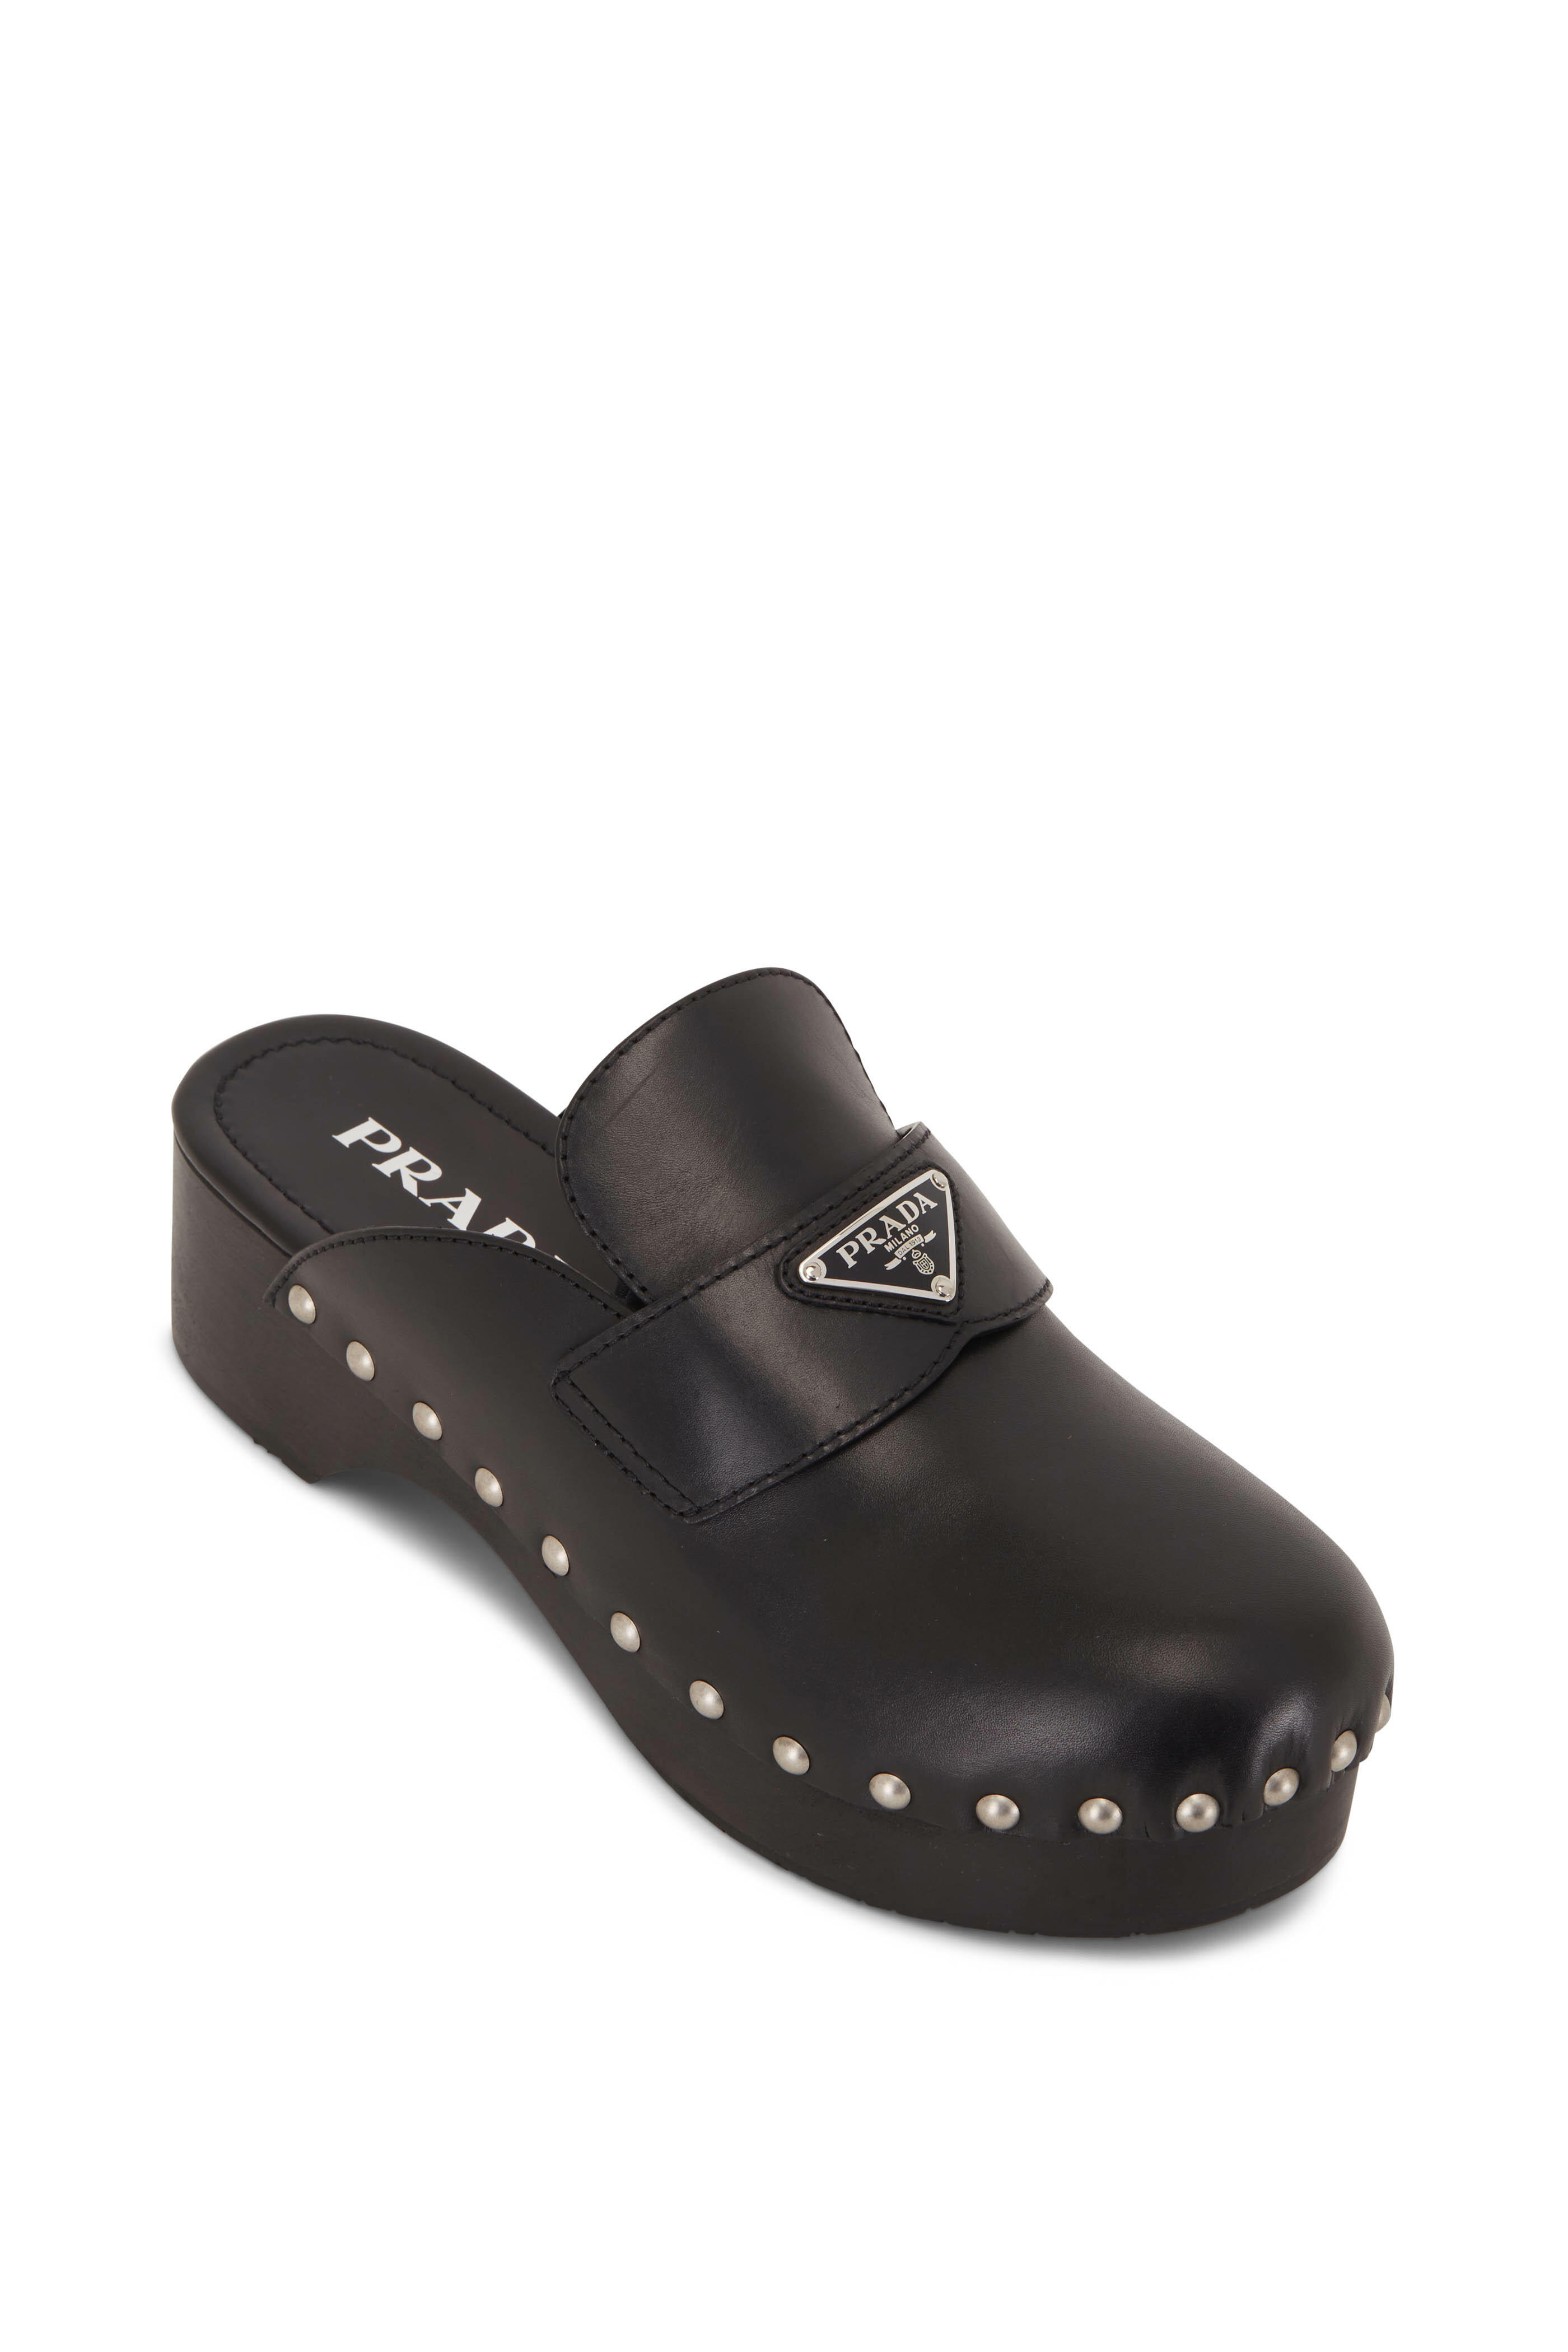 Prada Women's Studded Leather Clogs - Natural - Size 10